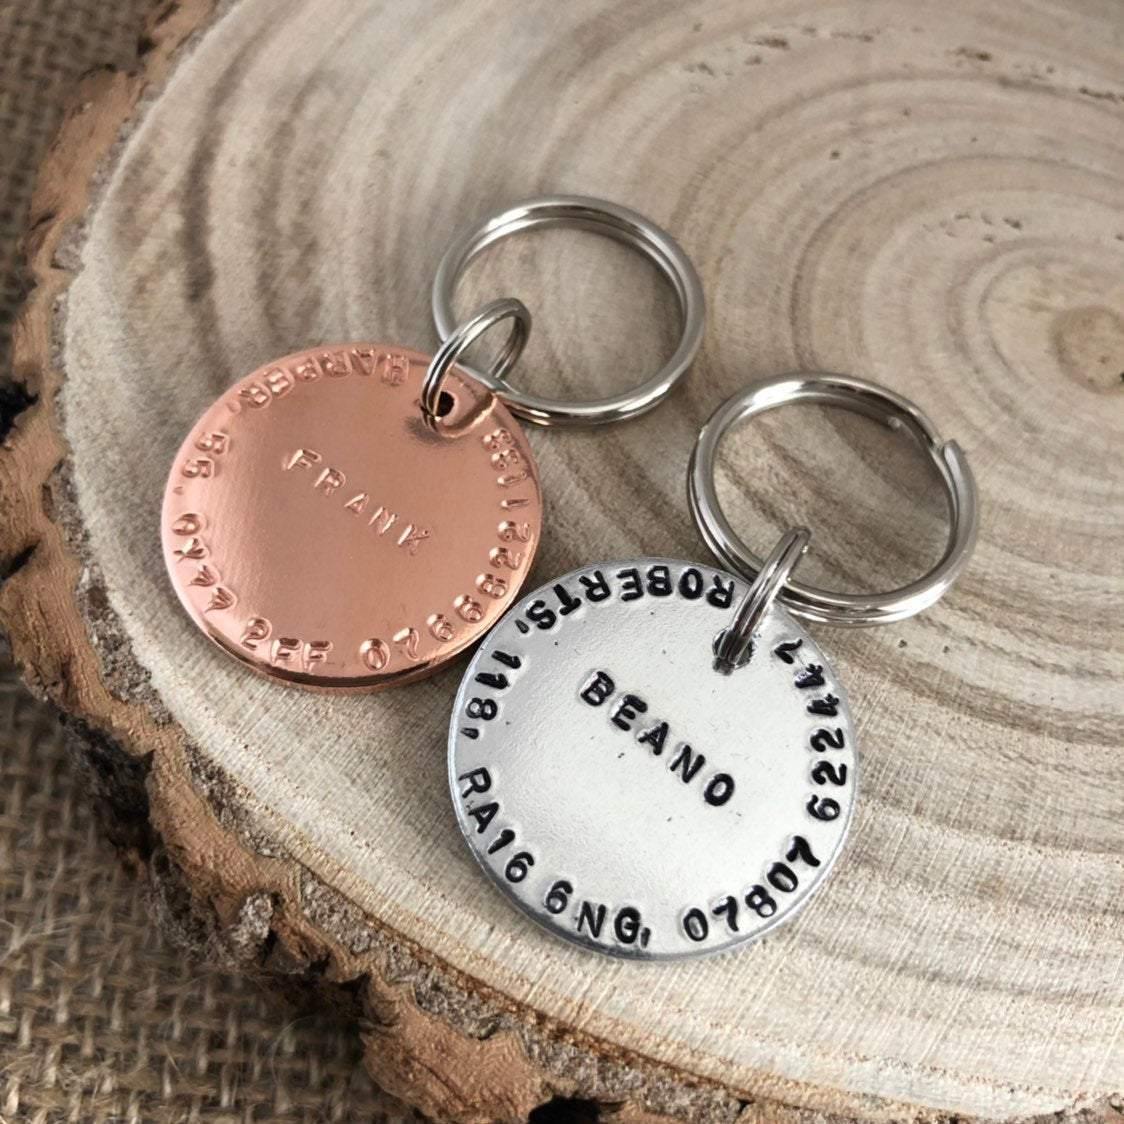 Simple Disc Dog ID Tag - The Little Stamping Co.